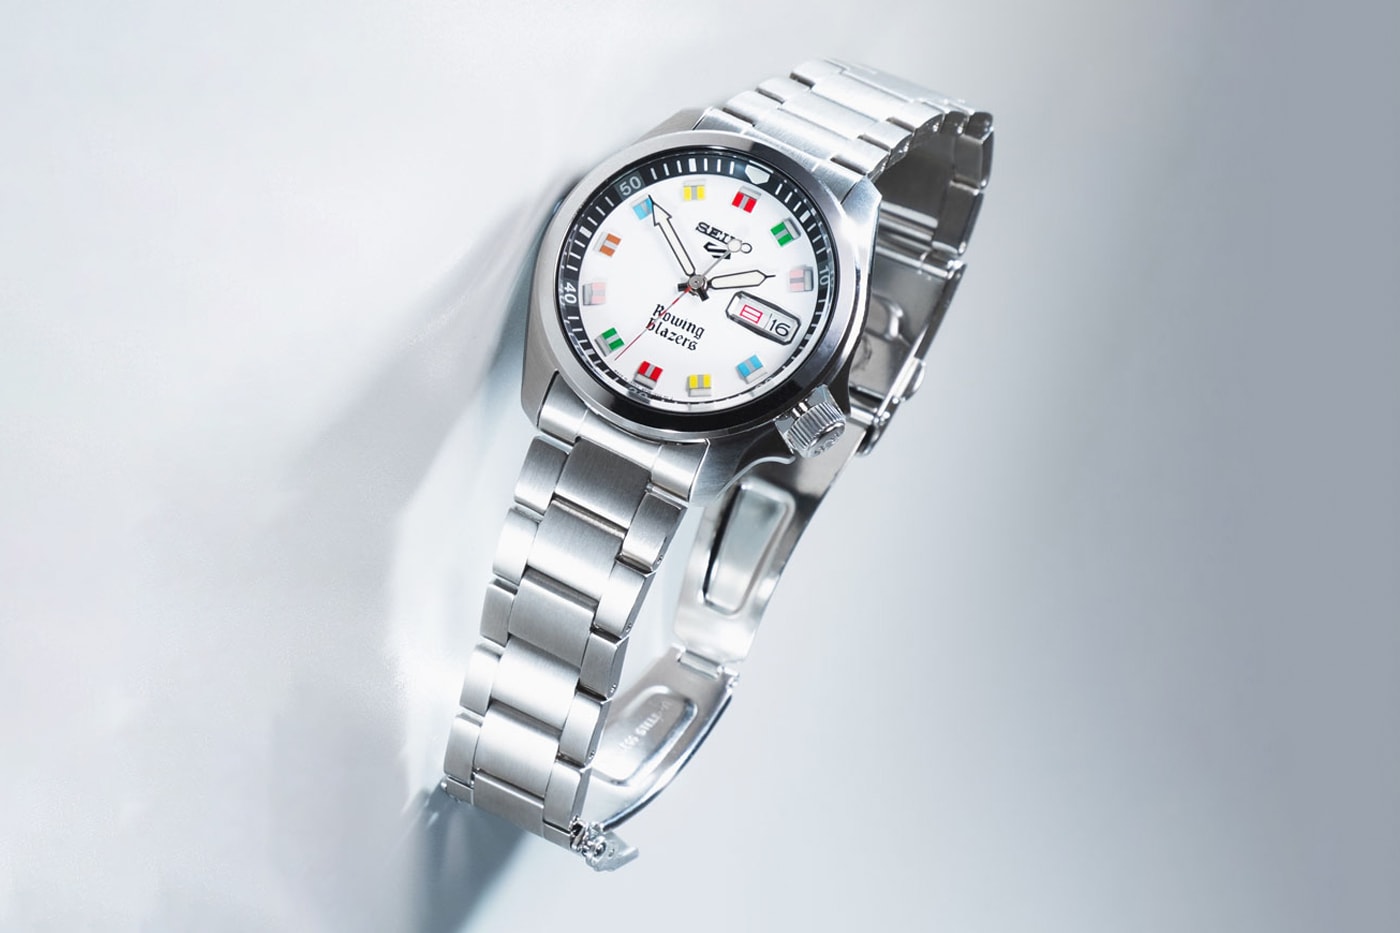 Rowing Blazers and Seiko Introduce a Colorful Range of Sports Diver Timepieces